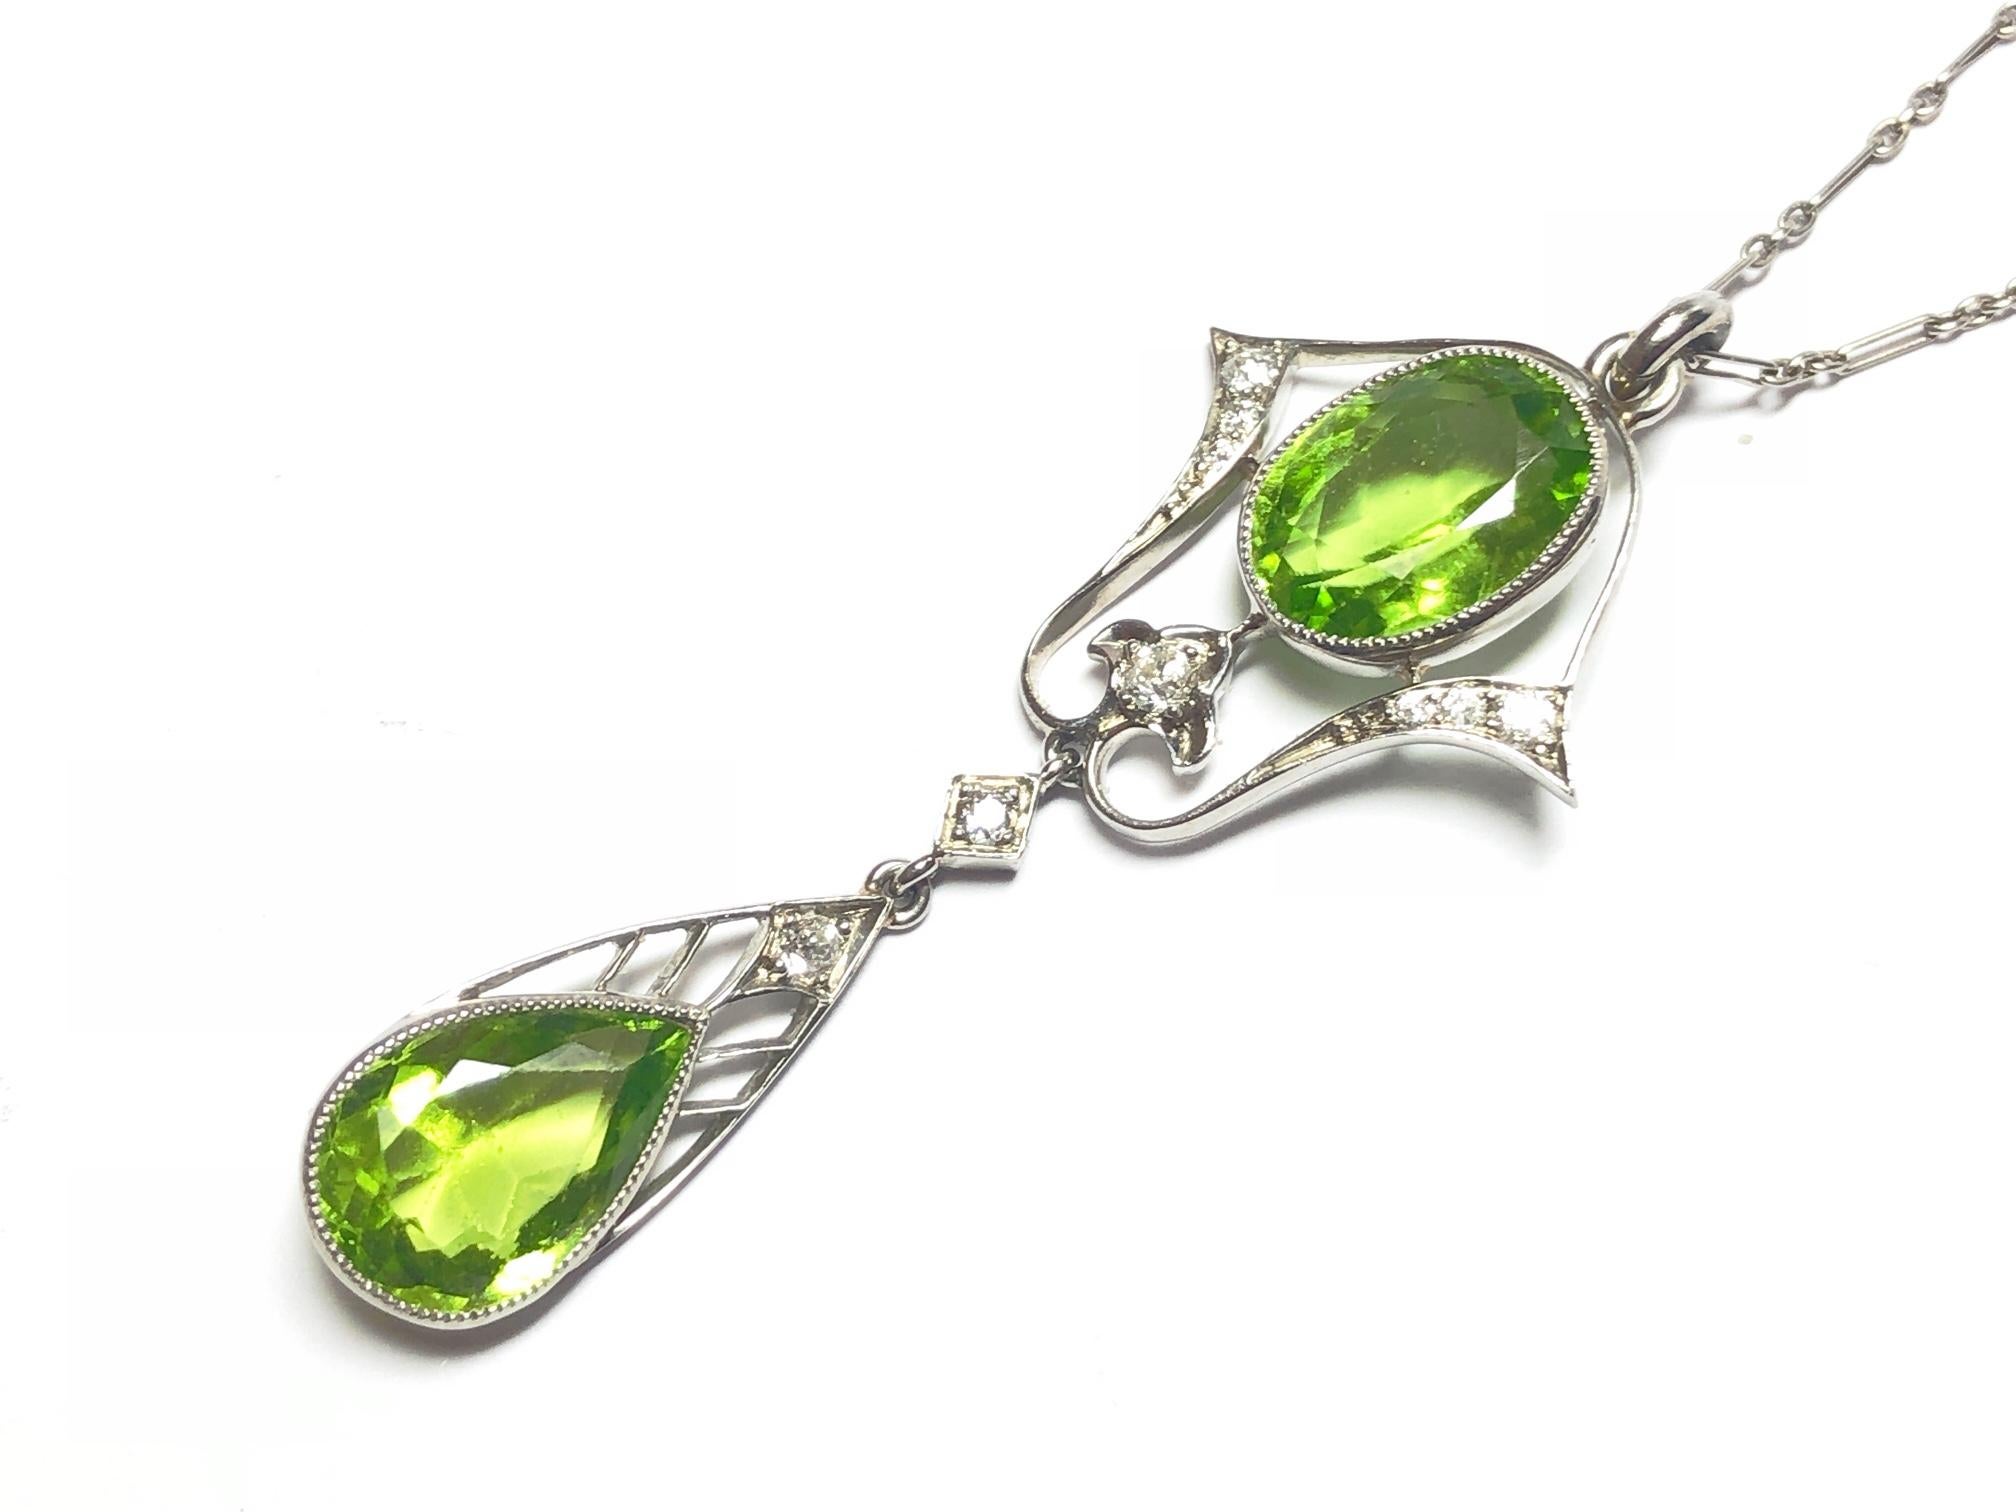 A Black Starr & Frost peridot and diamond Lavalier style pendant, set with old-cut diamonds, with an oval faceted peridot, with an estimated total weight of 3.61ct and a pear shape peridot, with an estimated total weight of 3.44ct, hanging from a